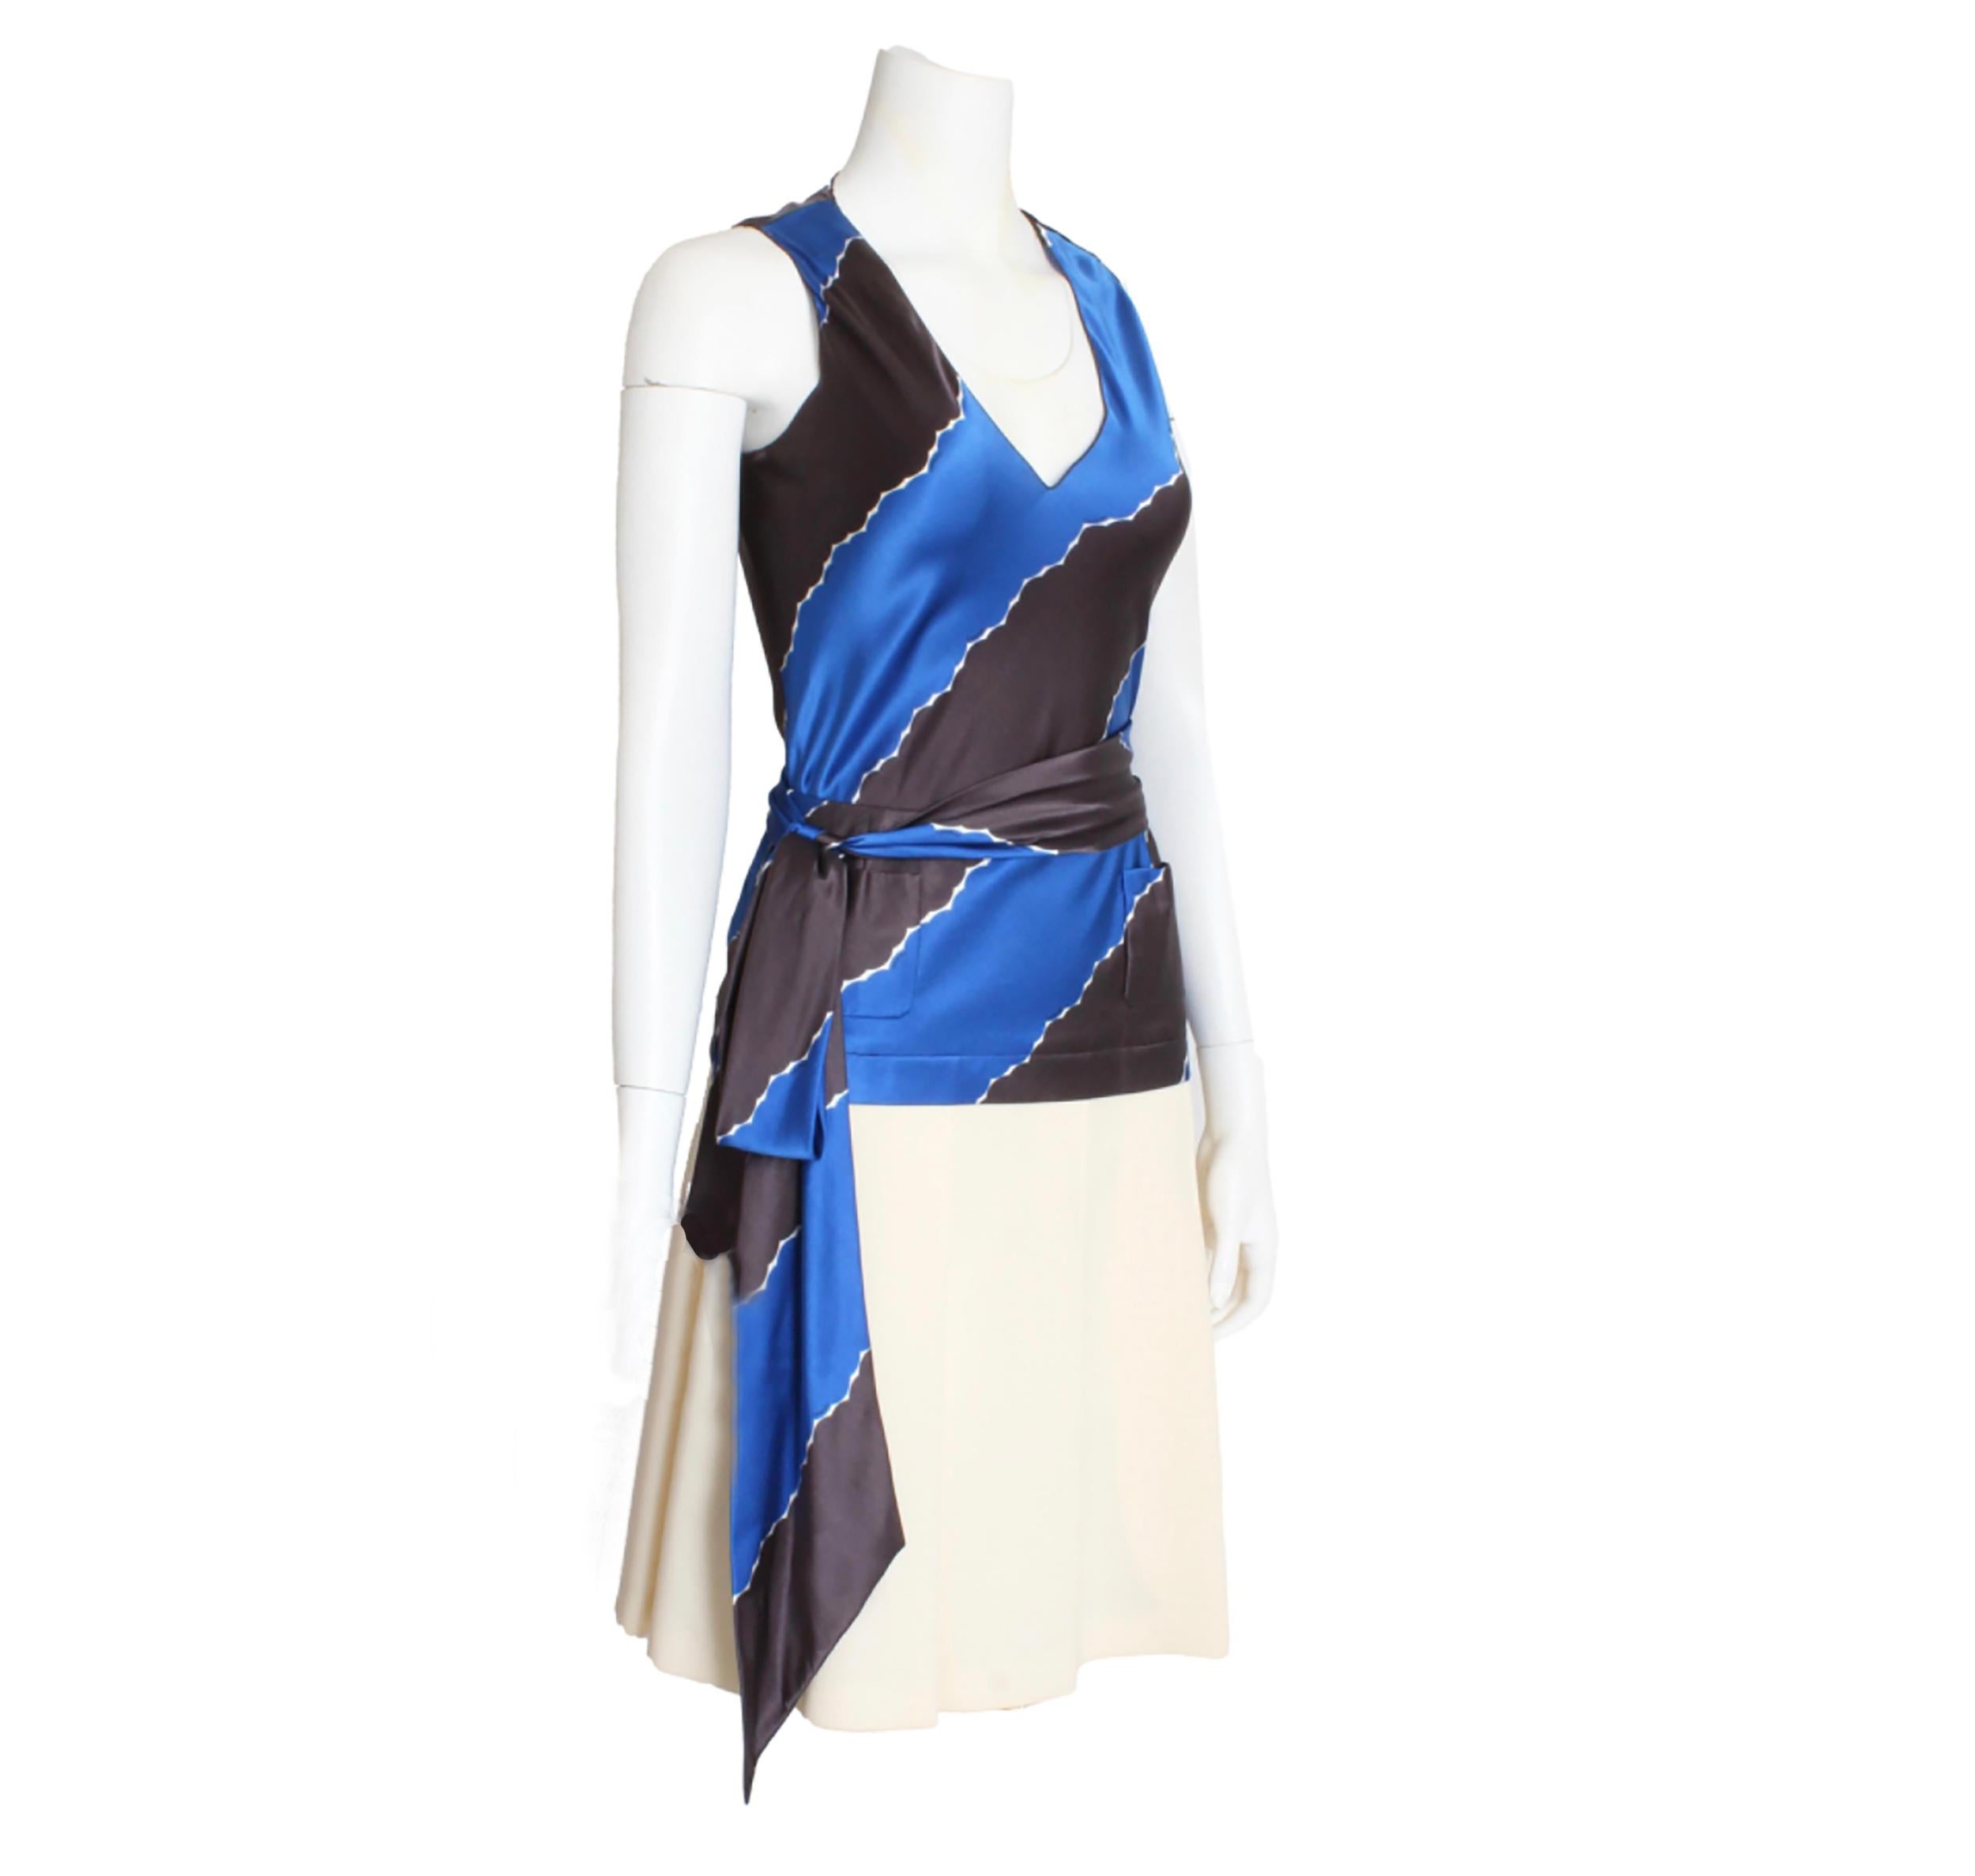 Authentic, preowned Chanel sleeveless top with matching pleated skirt, from the '05C collection.  Made from an abstract print in blue and pebble brown, the top features a v-cut collar and slips over the head.  The skirt is made from matching silk at